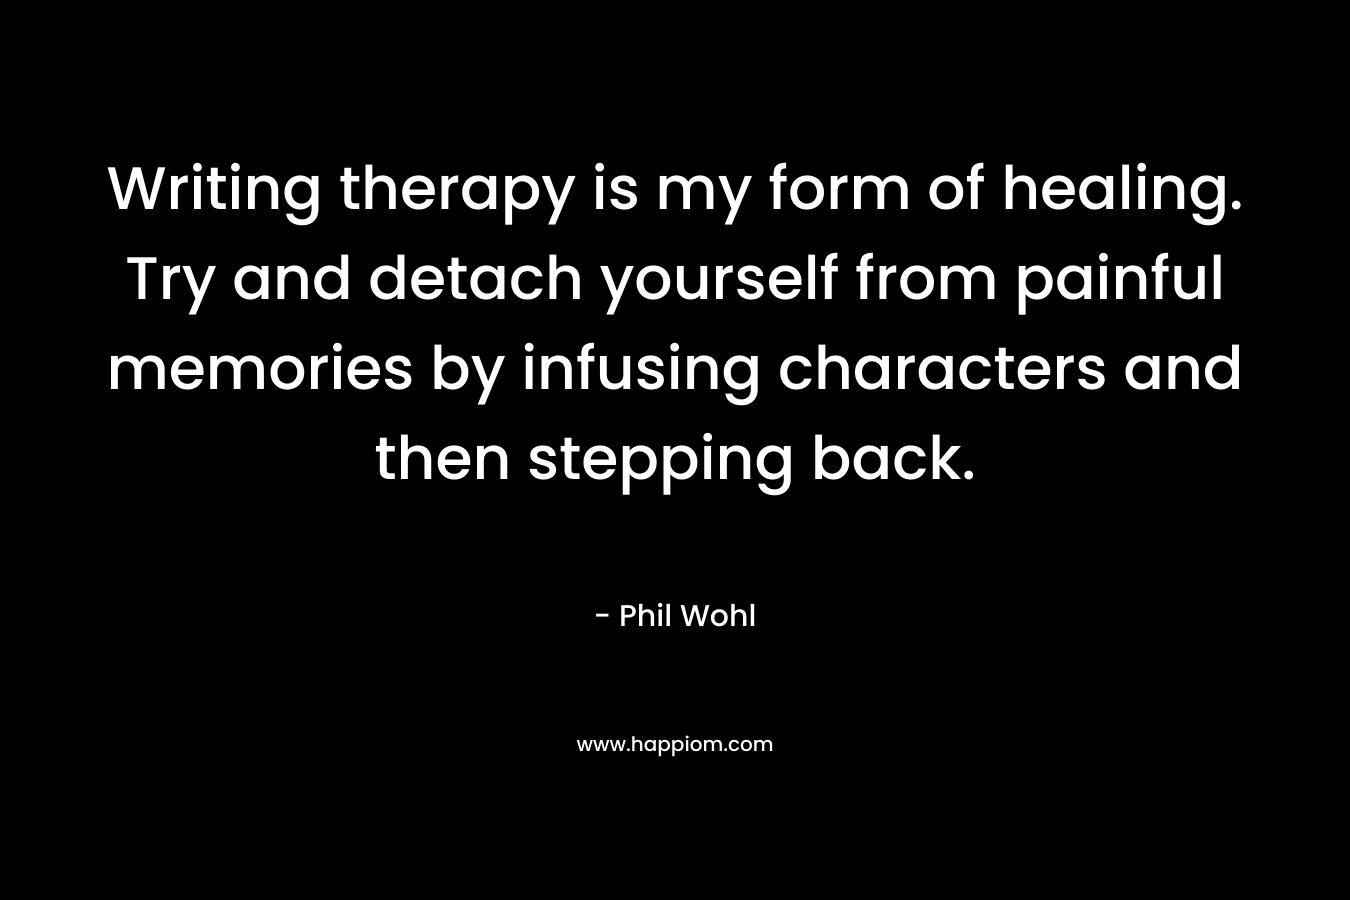 Writing therapy is my form of healing. Try and detach yourself from painful memories by infusing characters and then stepping back. – Phil Wohl